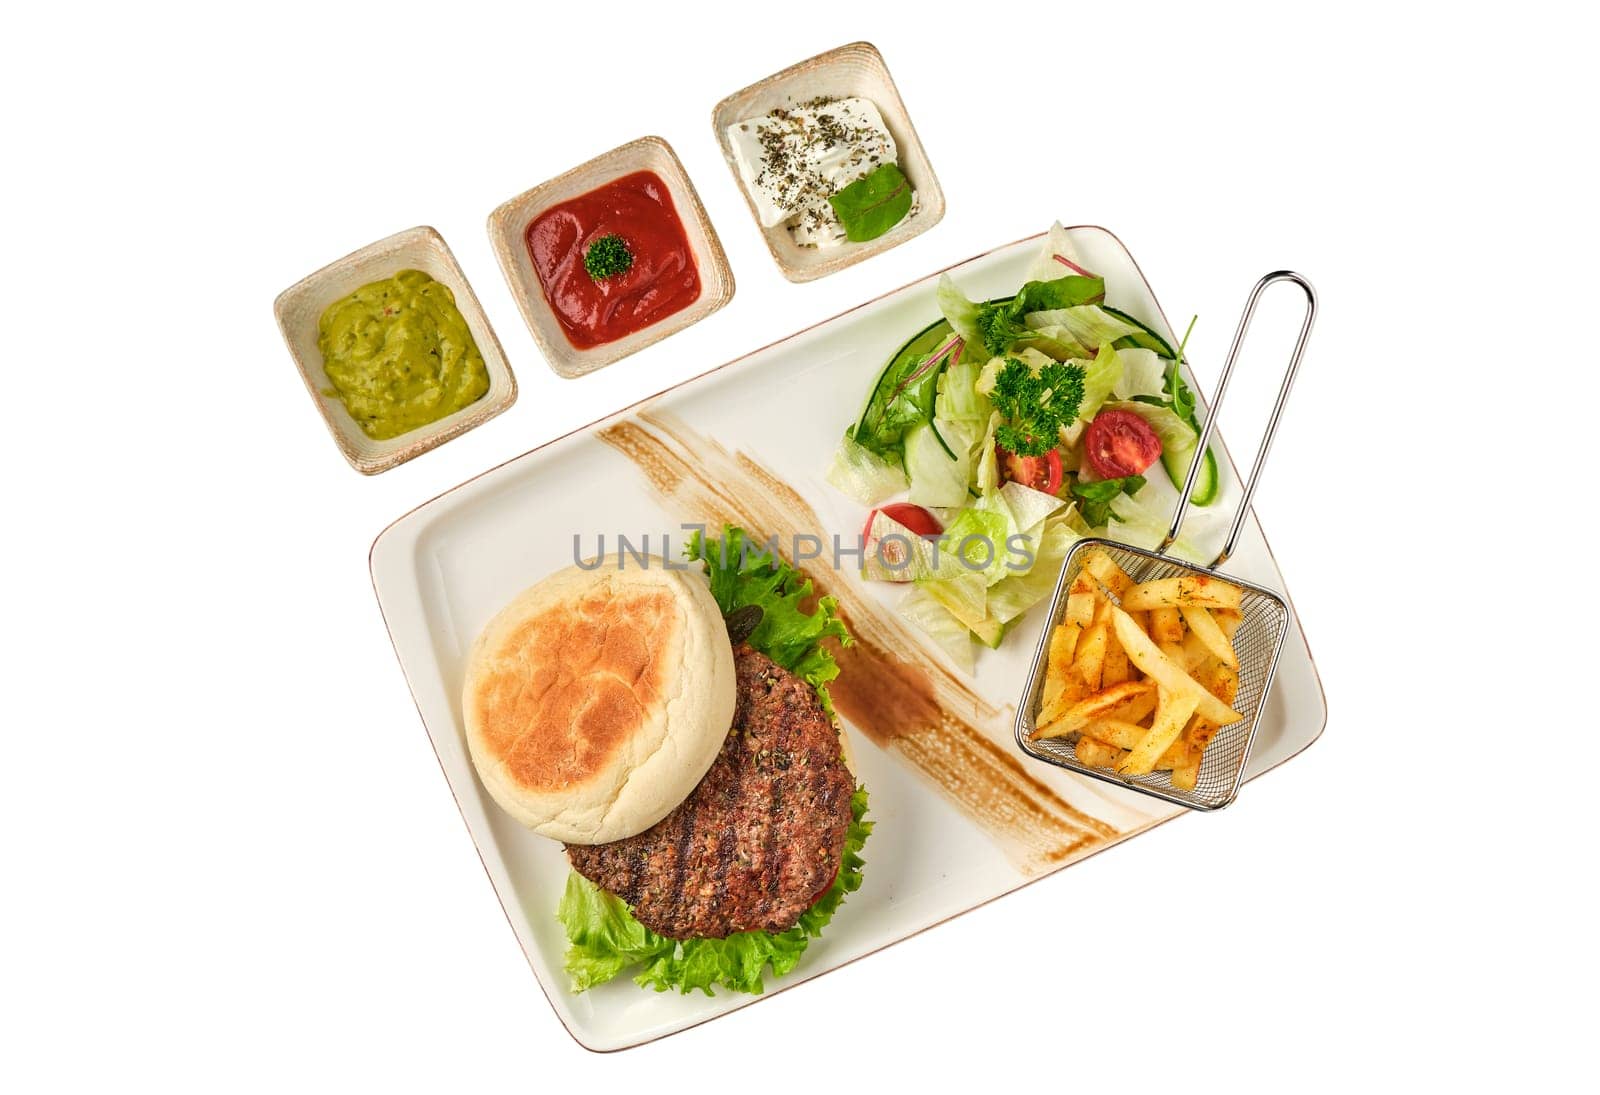 Delicious grilled  burger on white plate on white background.  with sauces, french fries and salads. by Sonat